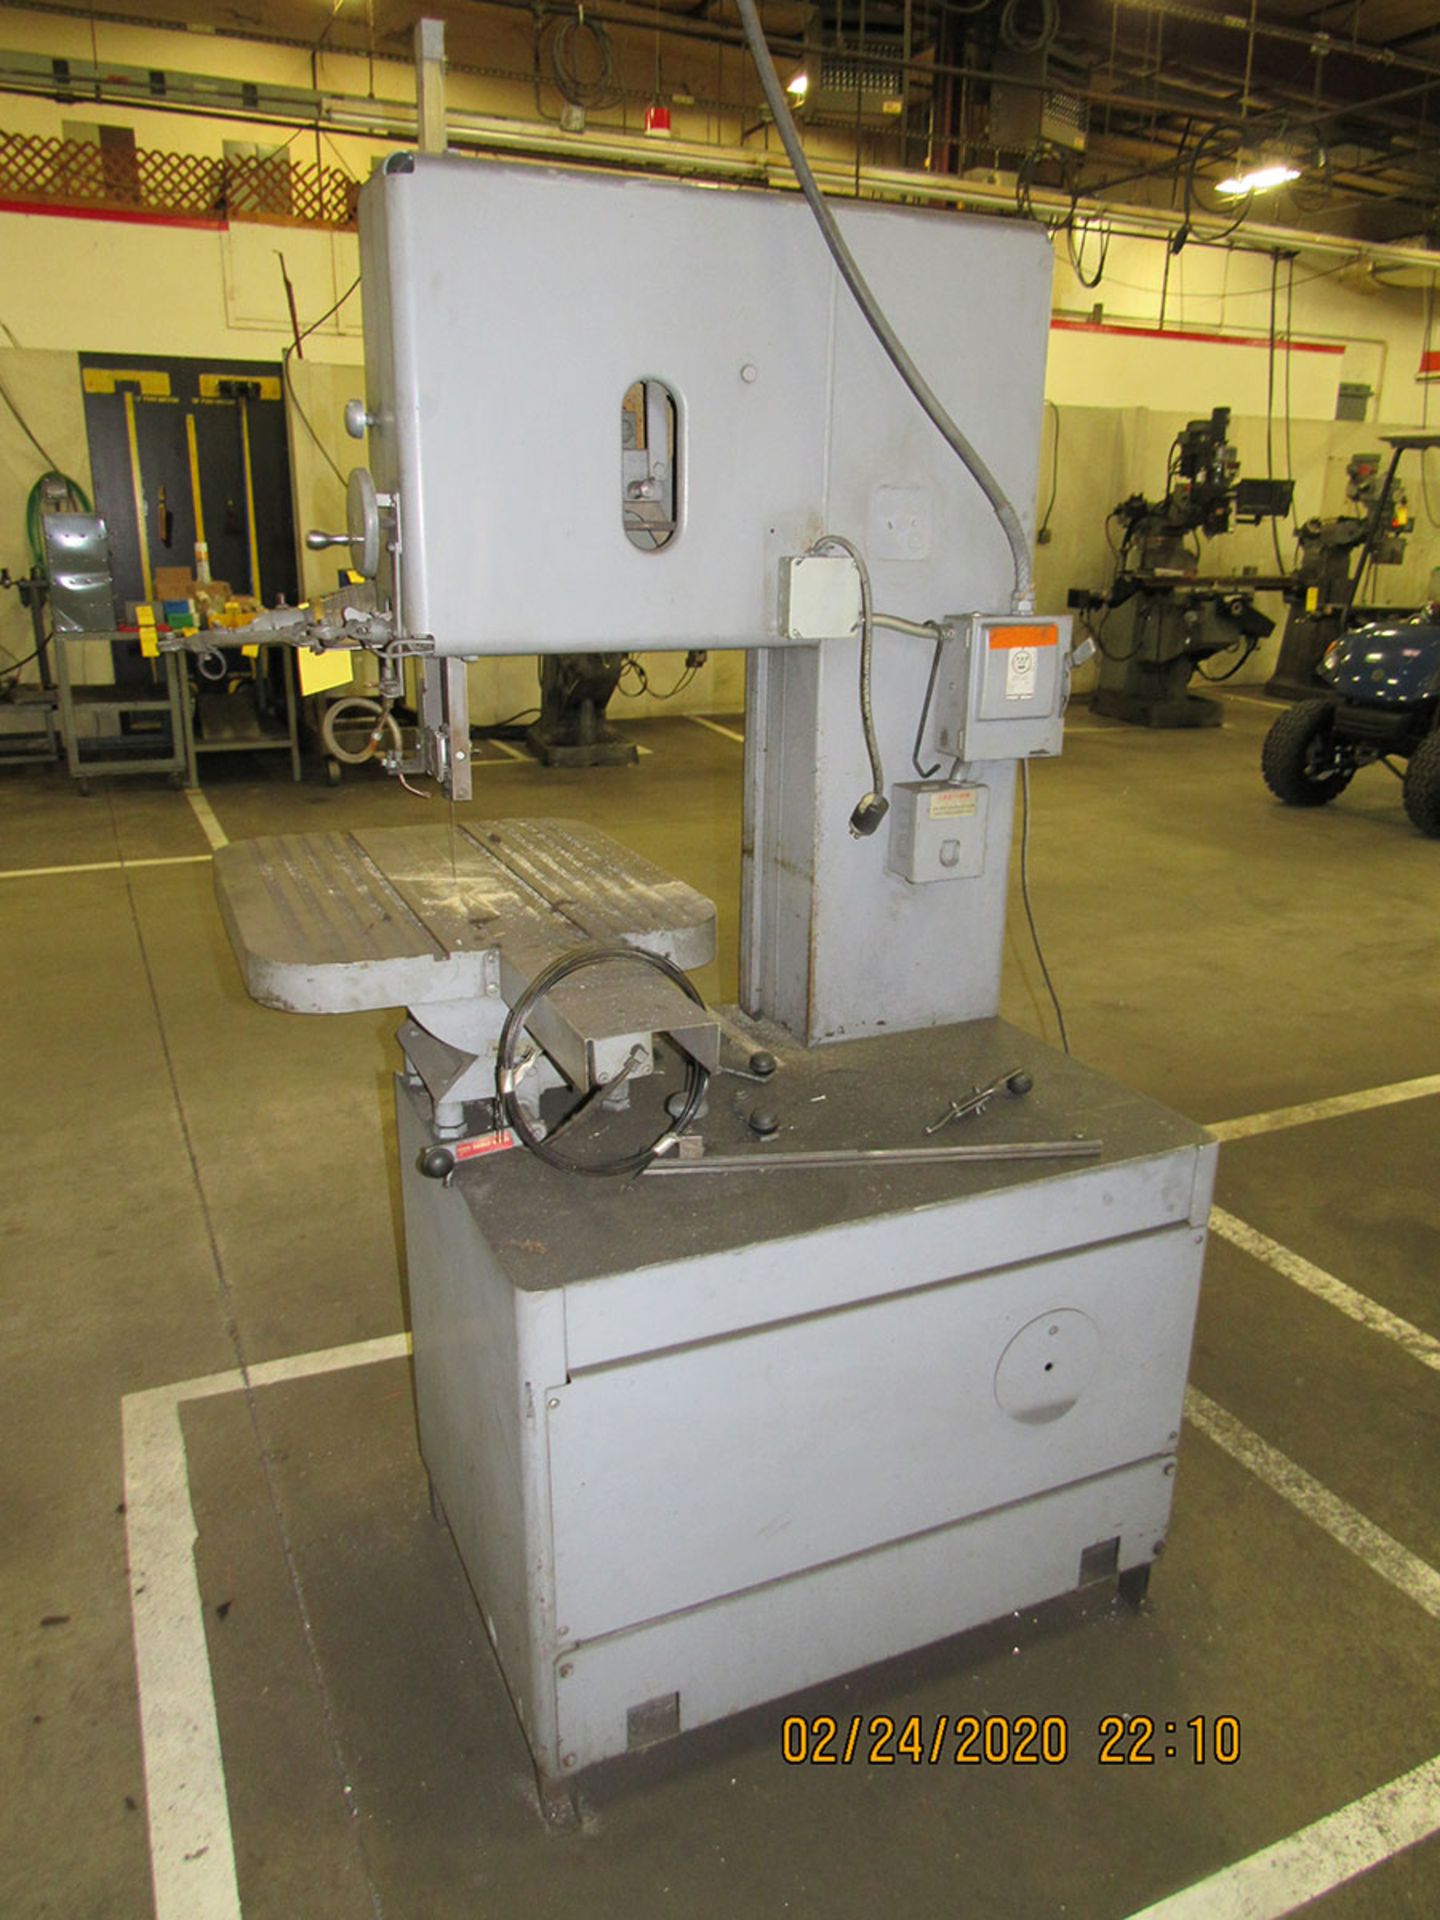 SATTERLEE CO. 18'' VERTICAL BAND SAW; TYPE 4V-18, S/N 1310, YEAR 1972 - Image 2 of 2